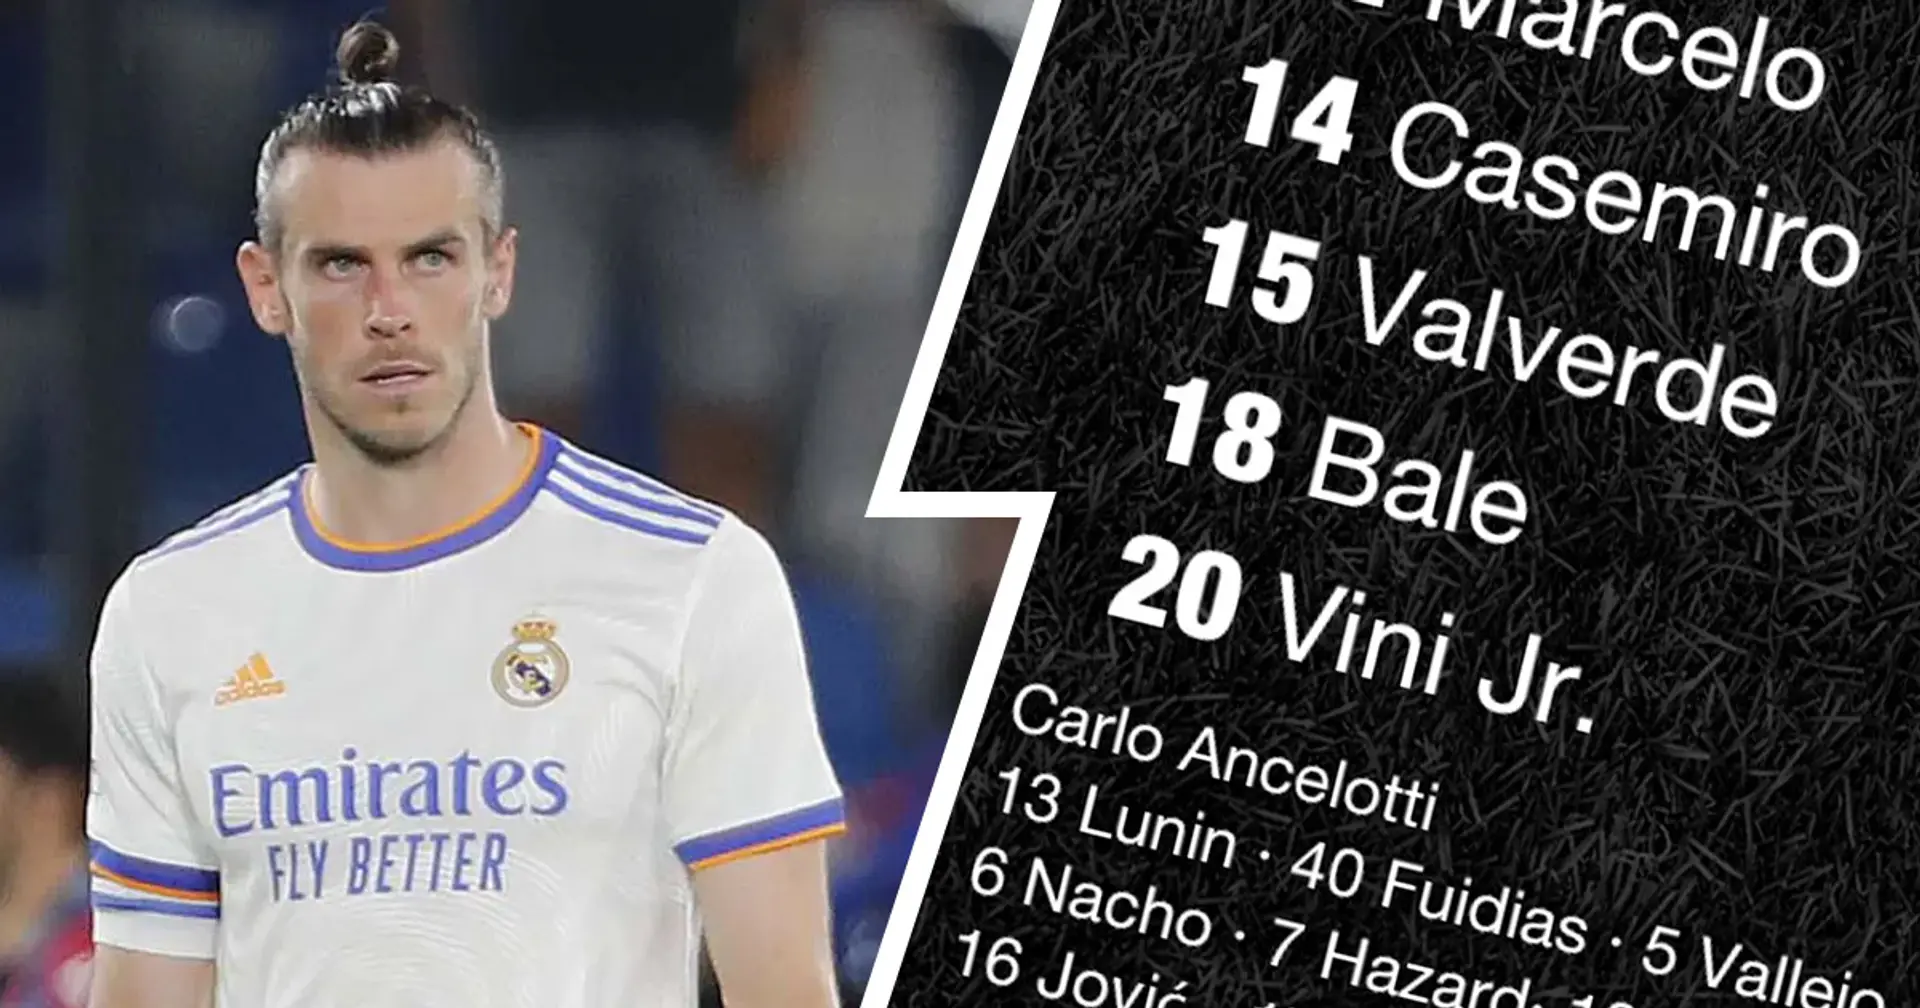 OFFICIAL: Bale in as Real Madrid XI vs Villarreal unveiled